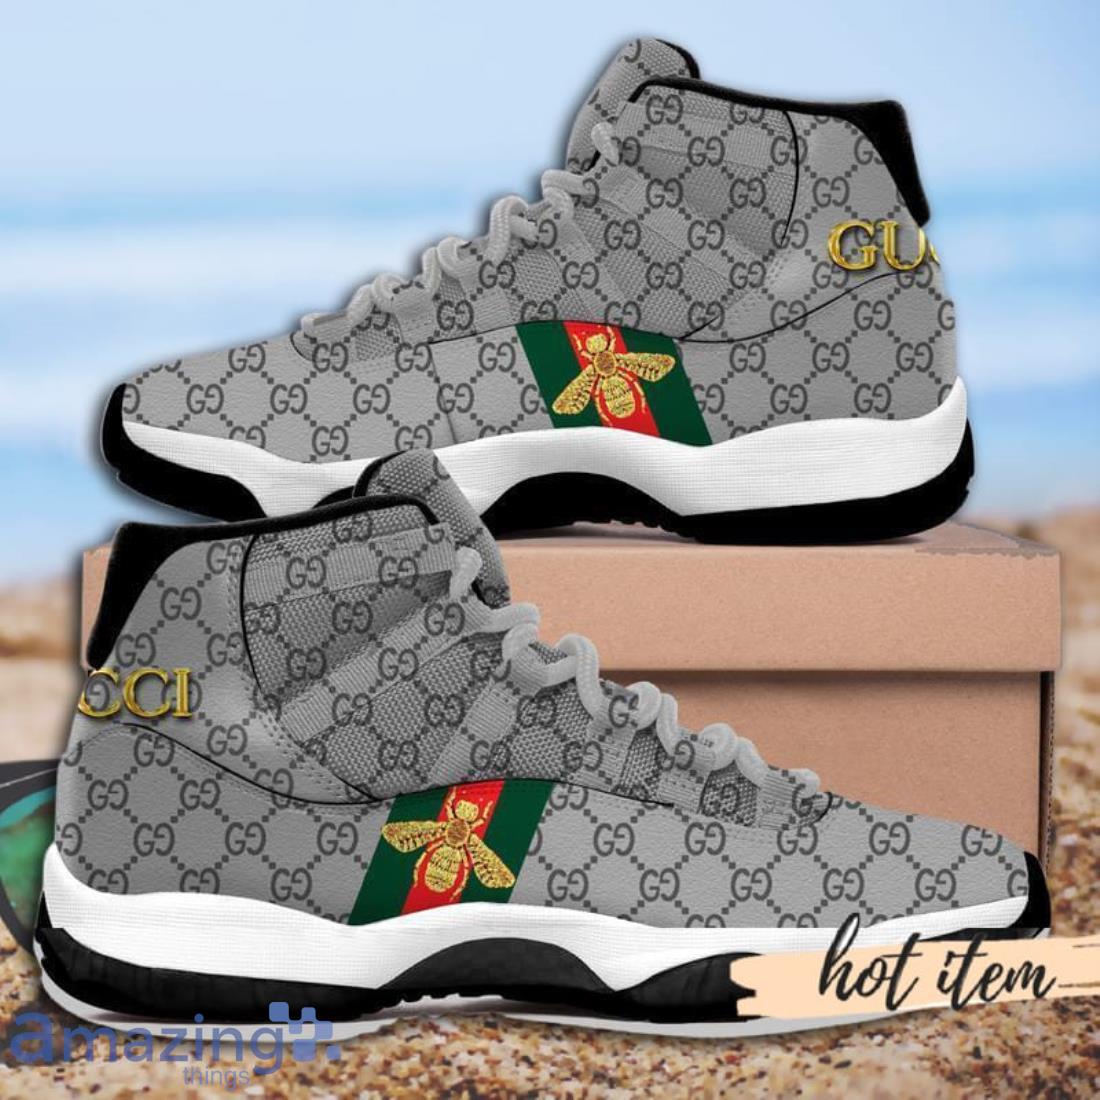 NEW FASHION] Gucci Air Jordan 11 Sneakers Shoes Hot 2023 For Men Women Limited  Edition New